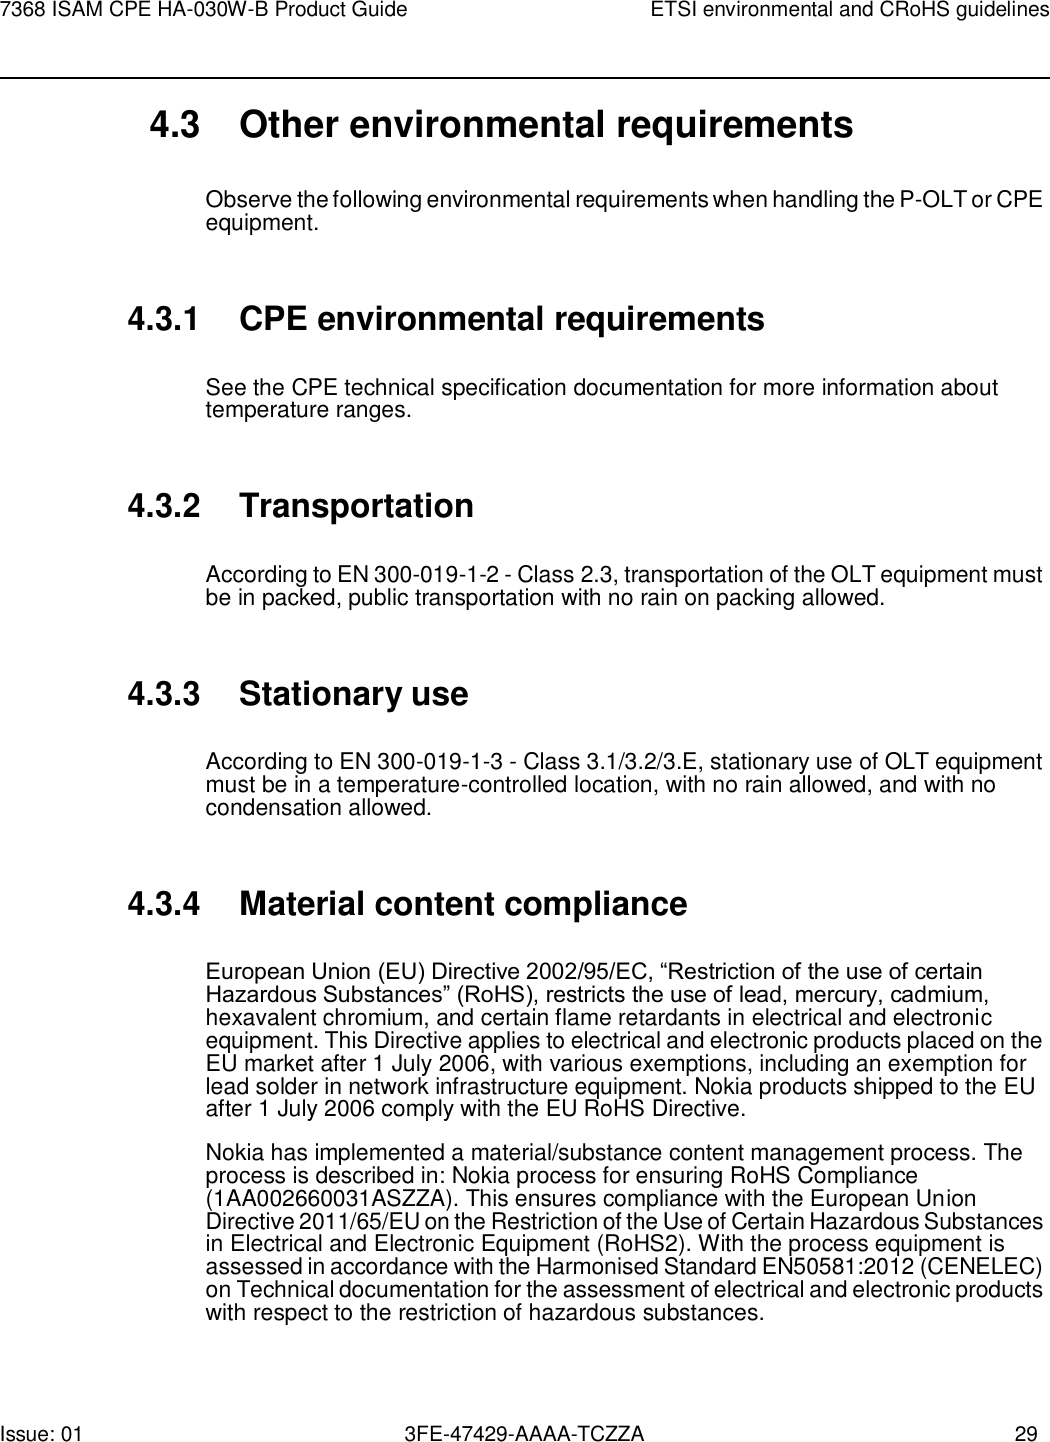 Page 29 of Nokia Bell HA030WB 7368 Intelligent Services Access Manager CPE User Manual 7368 ISAM CPE HA 020W A Product Guide